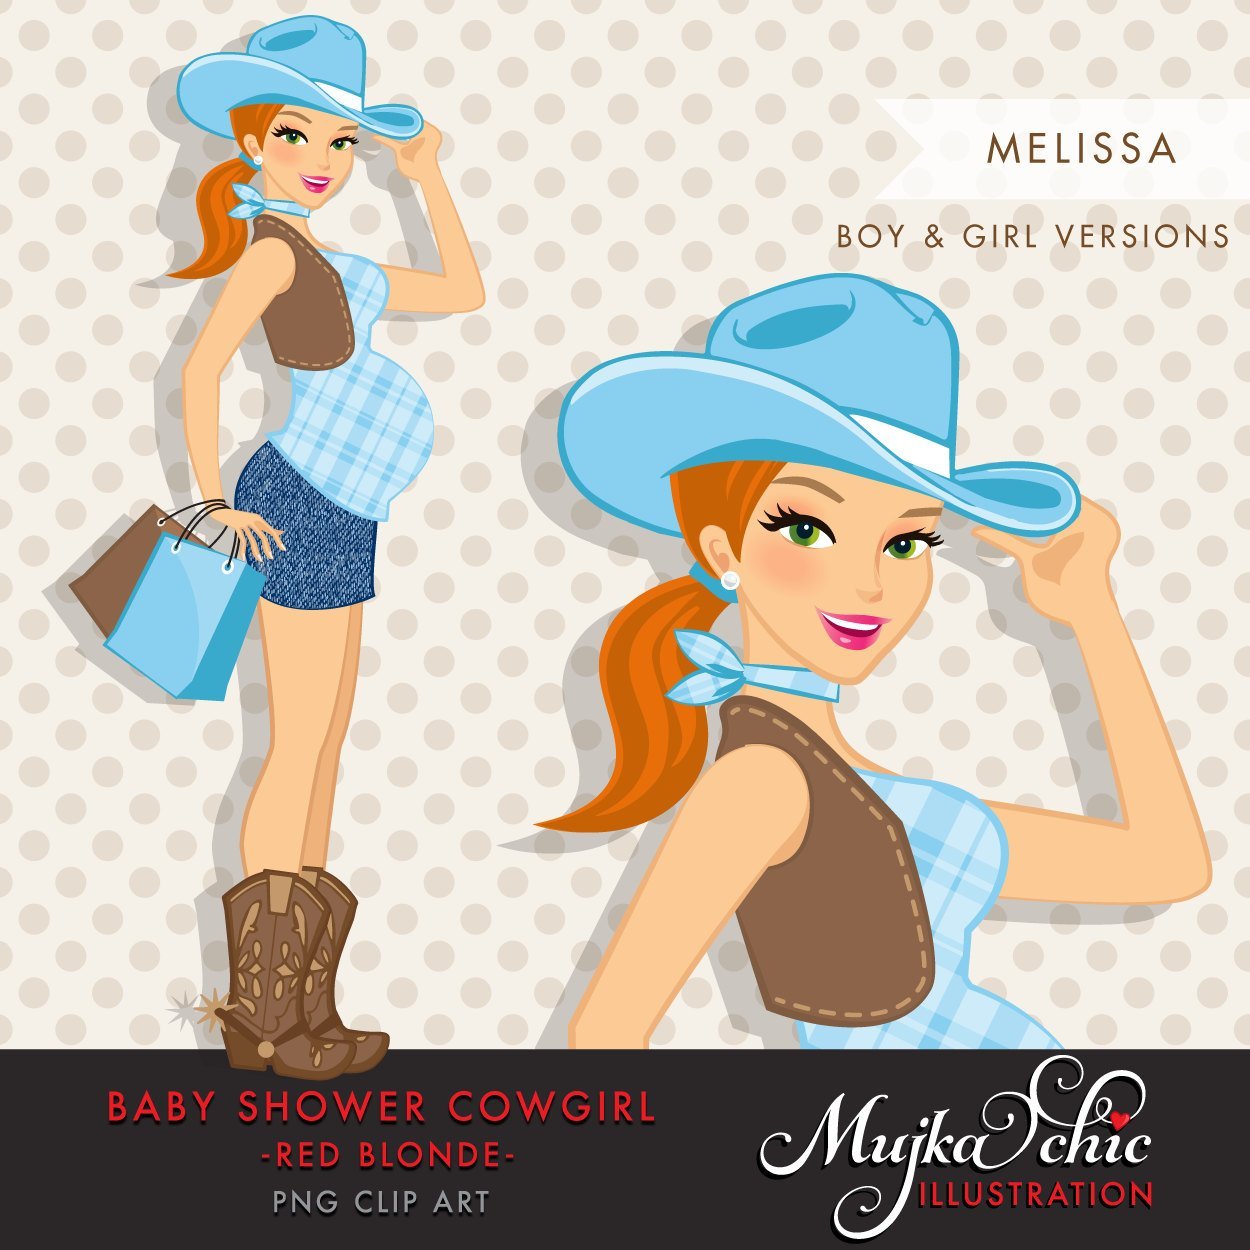 Red Blonde Cowgirl Pregnant Woman Character with gift bags Clipart. Baby Shower Party Invitation Character